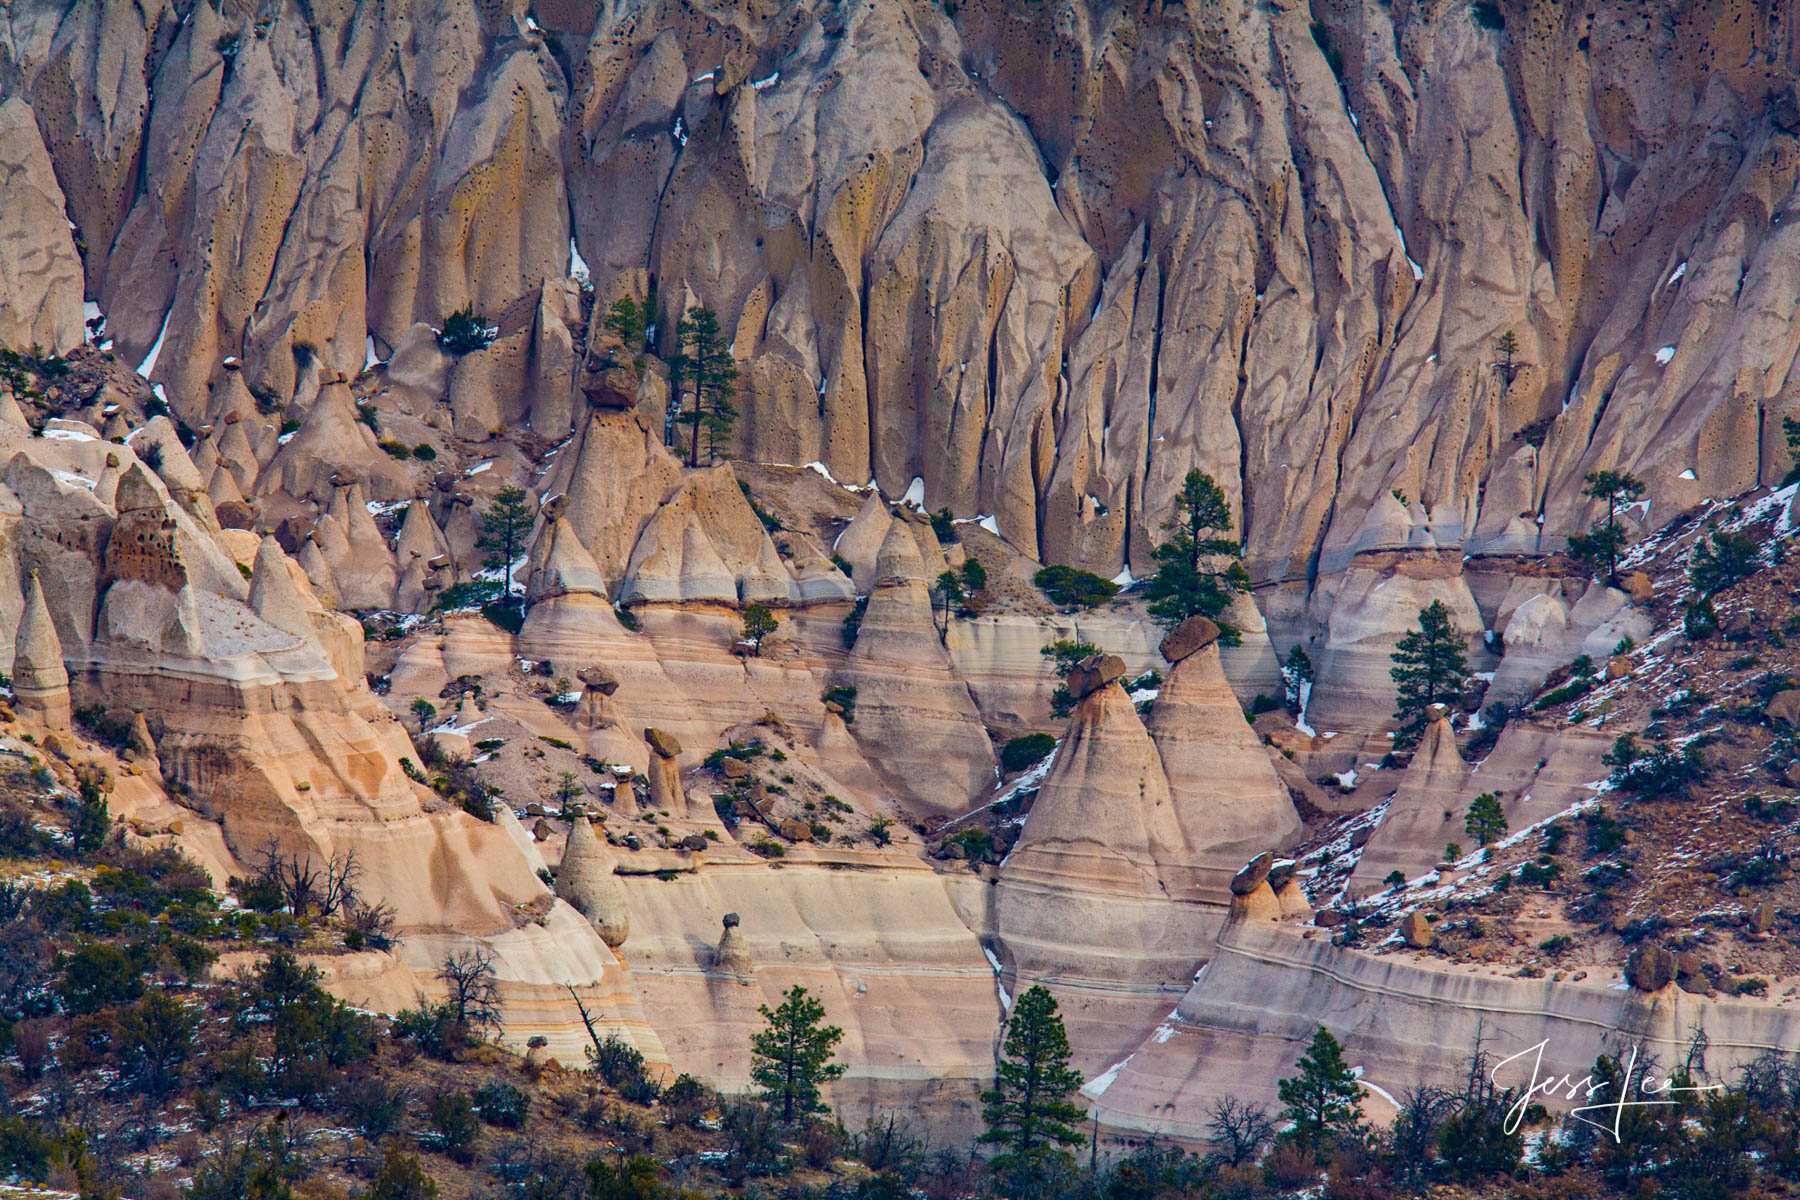 Limited Edition of 50 Exclusive high-resolution Museum Quality Fine Art Prints of Tent Rocks in the Desert Desert and Badlands...